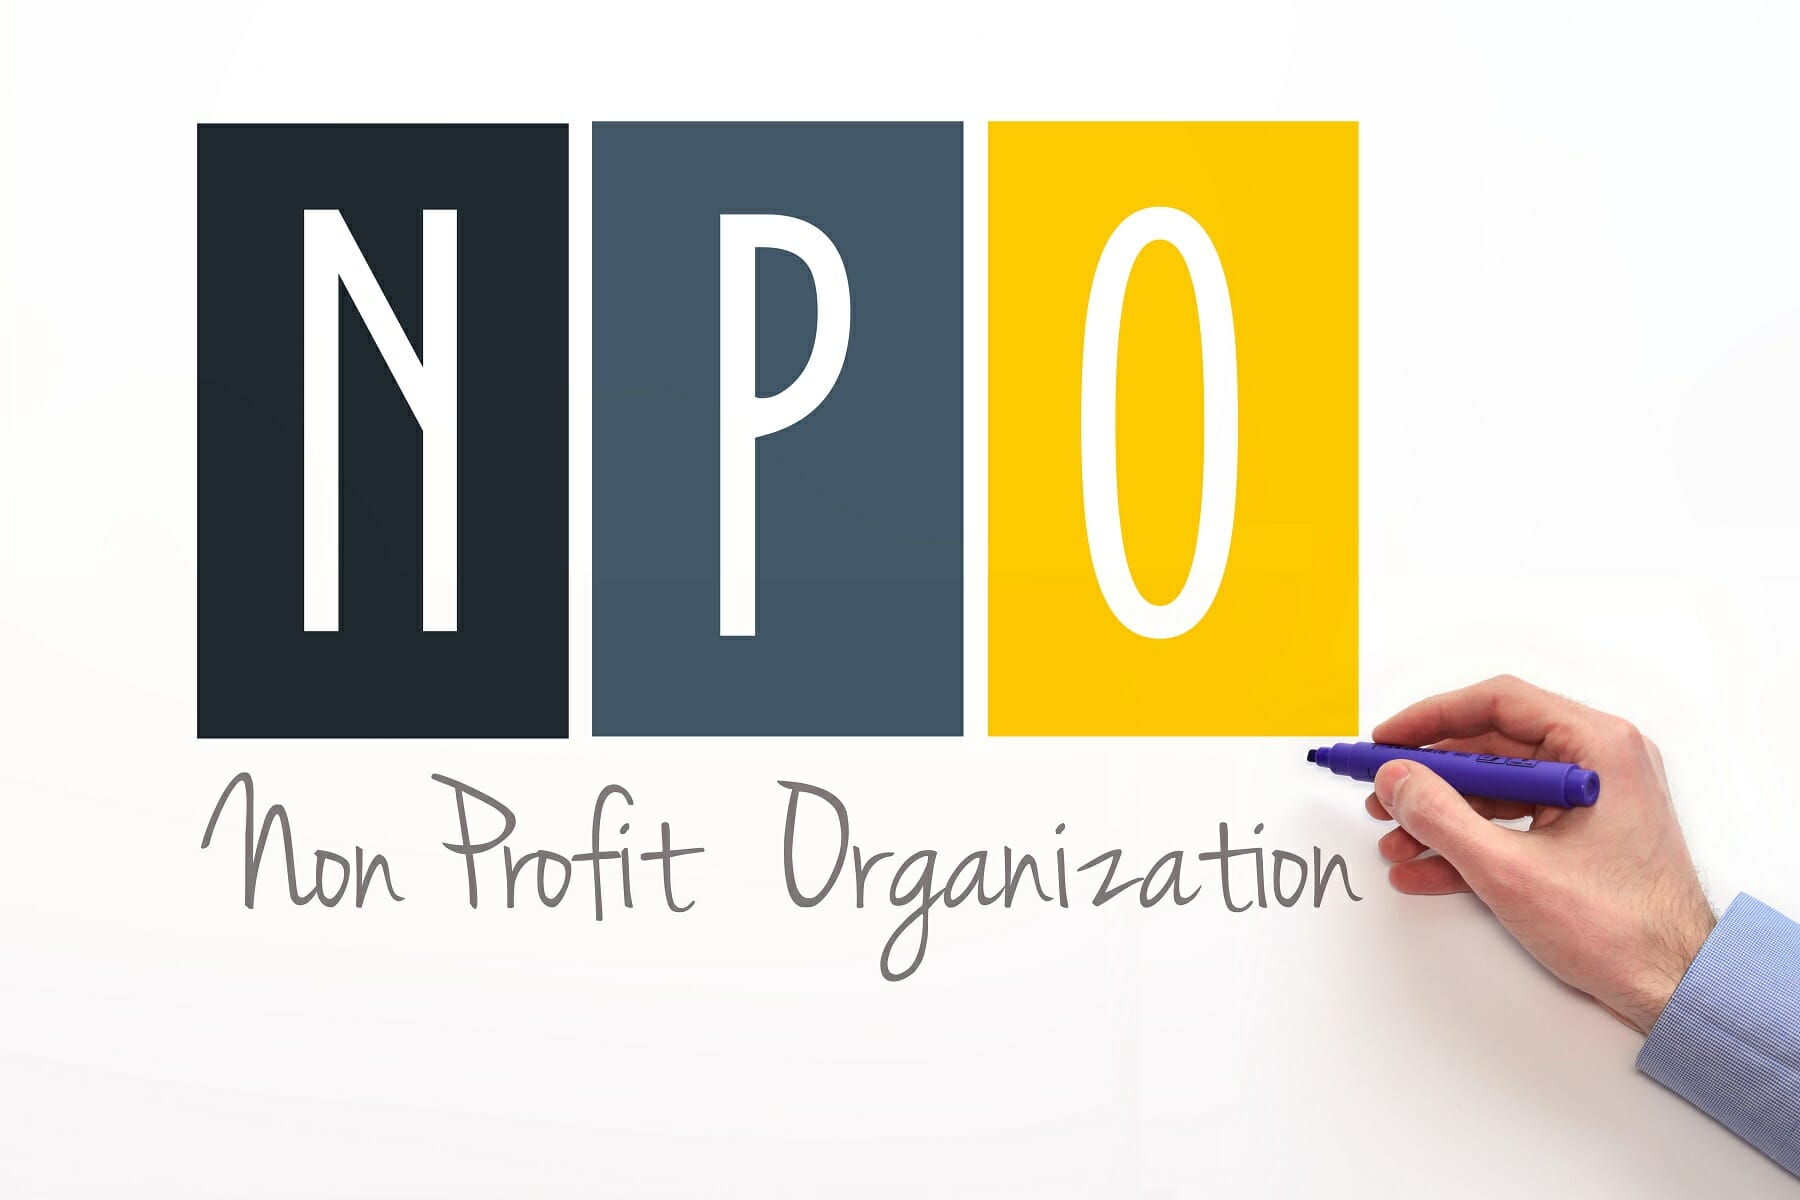 How to Start a Non-Profit Organization - Overview and Key